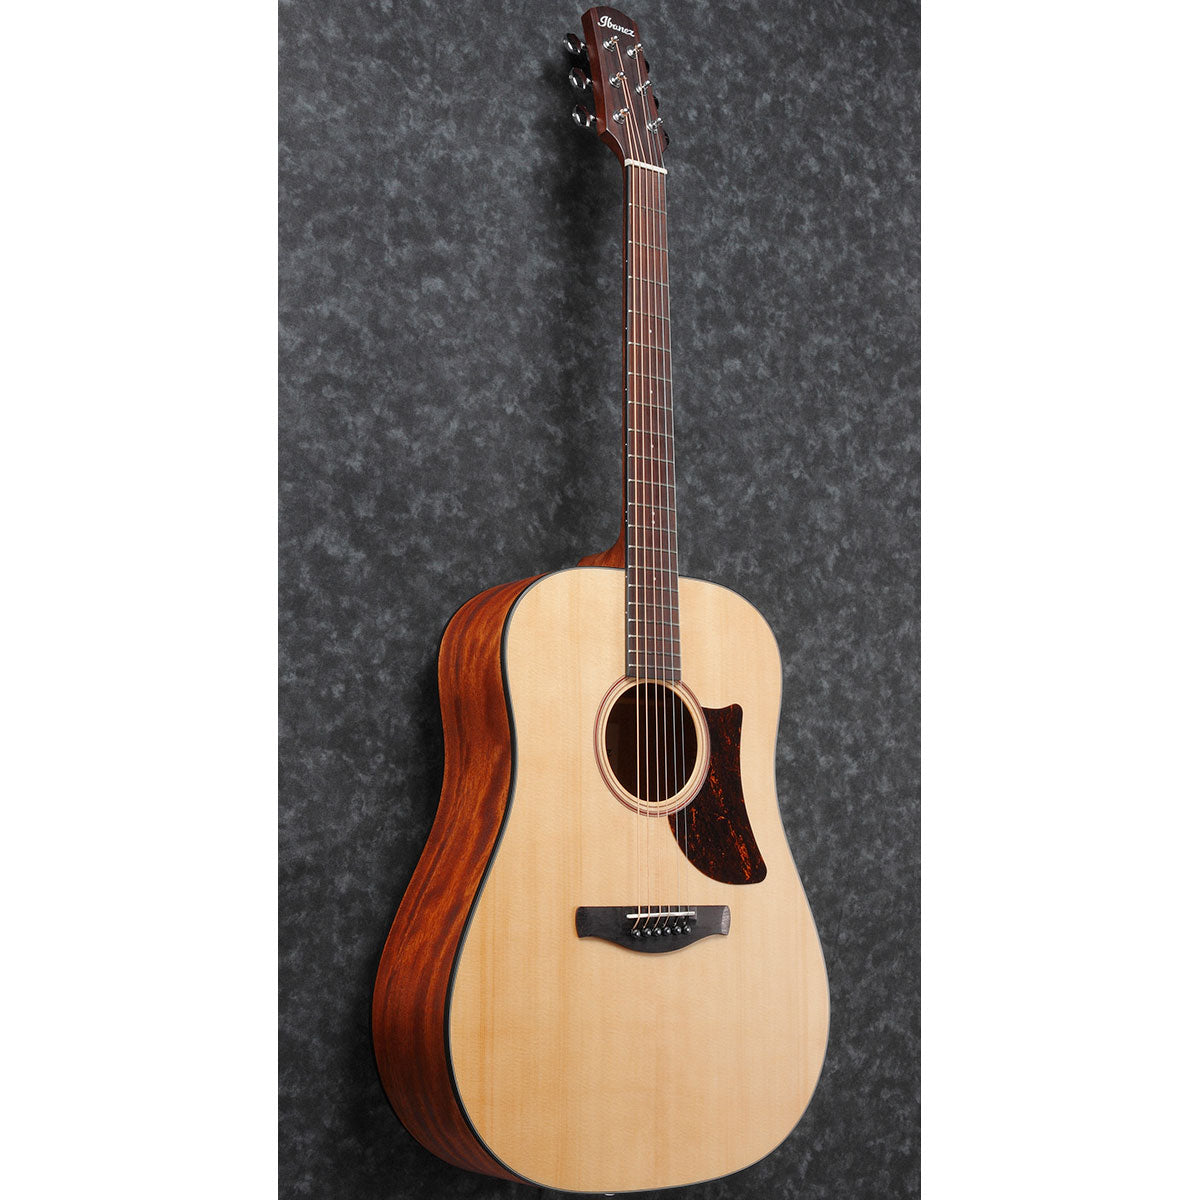 Perspective view of Ibanez AAD100 Acoustic Guitar - Open Pore Natural showing top and left side